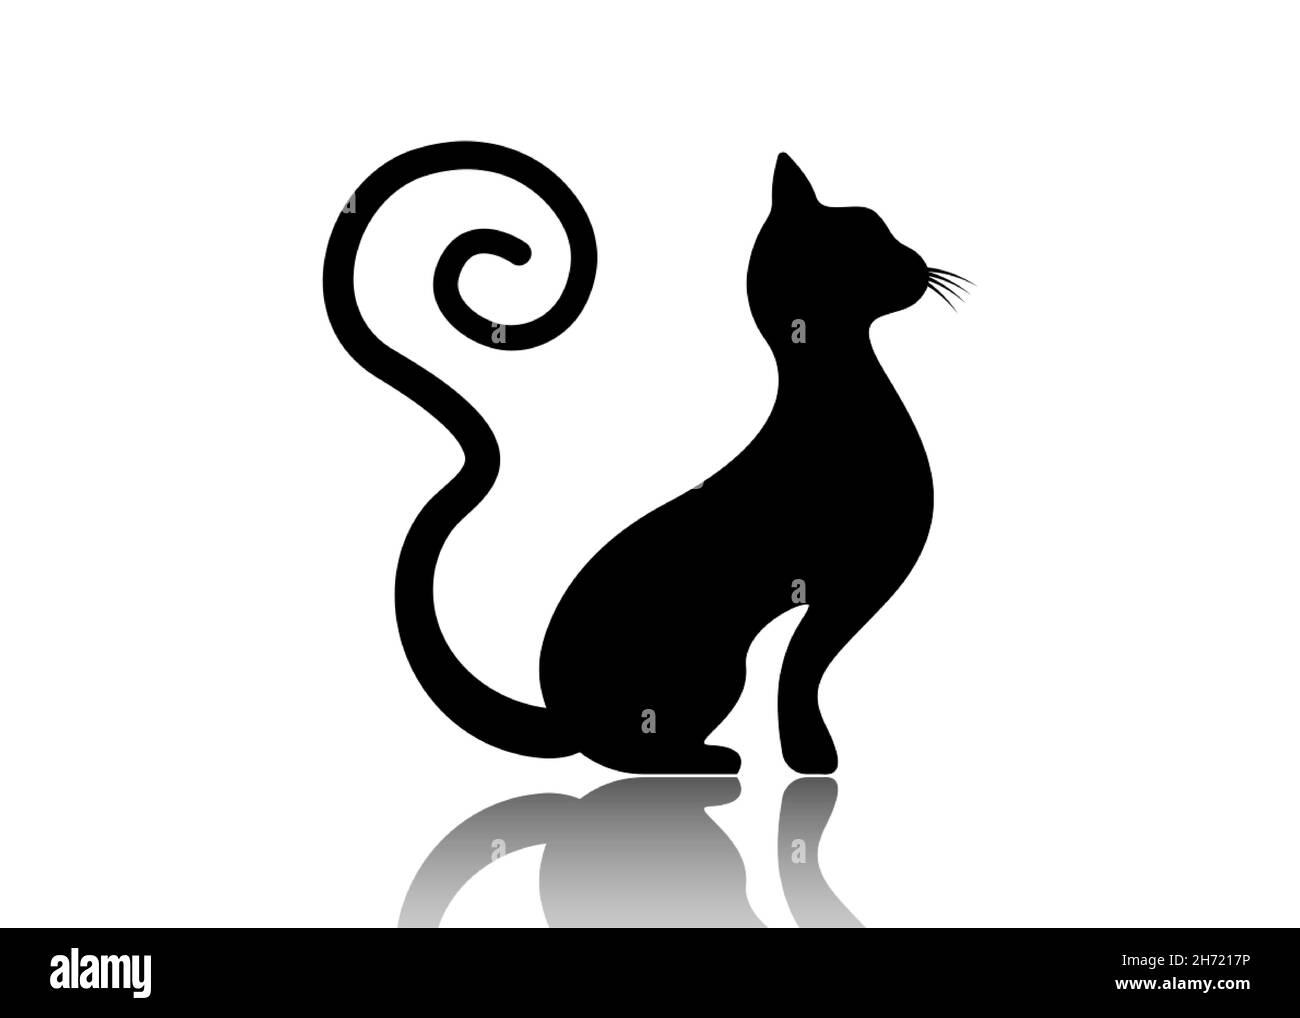 Black cat silhouette with curly tail, feline animal logo template, vector illustration isolated on a white background Stock Vector